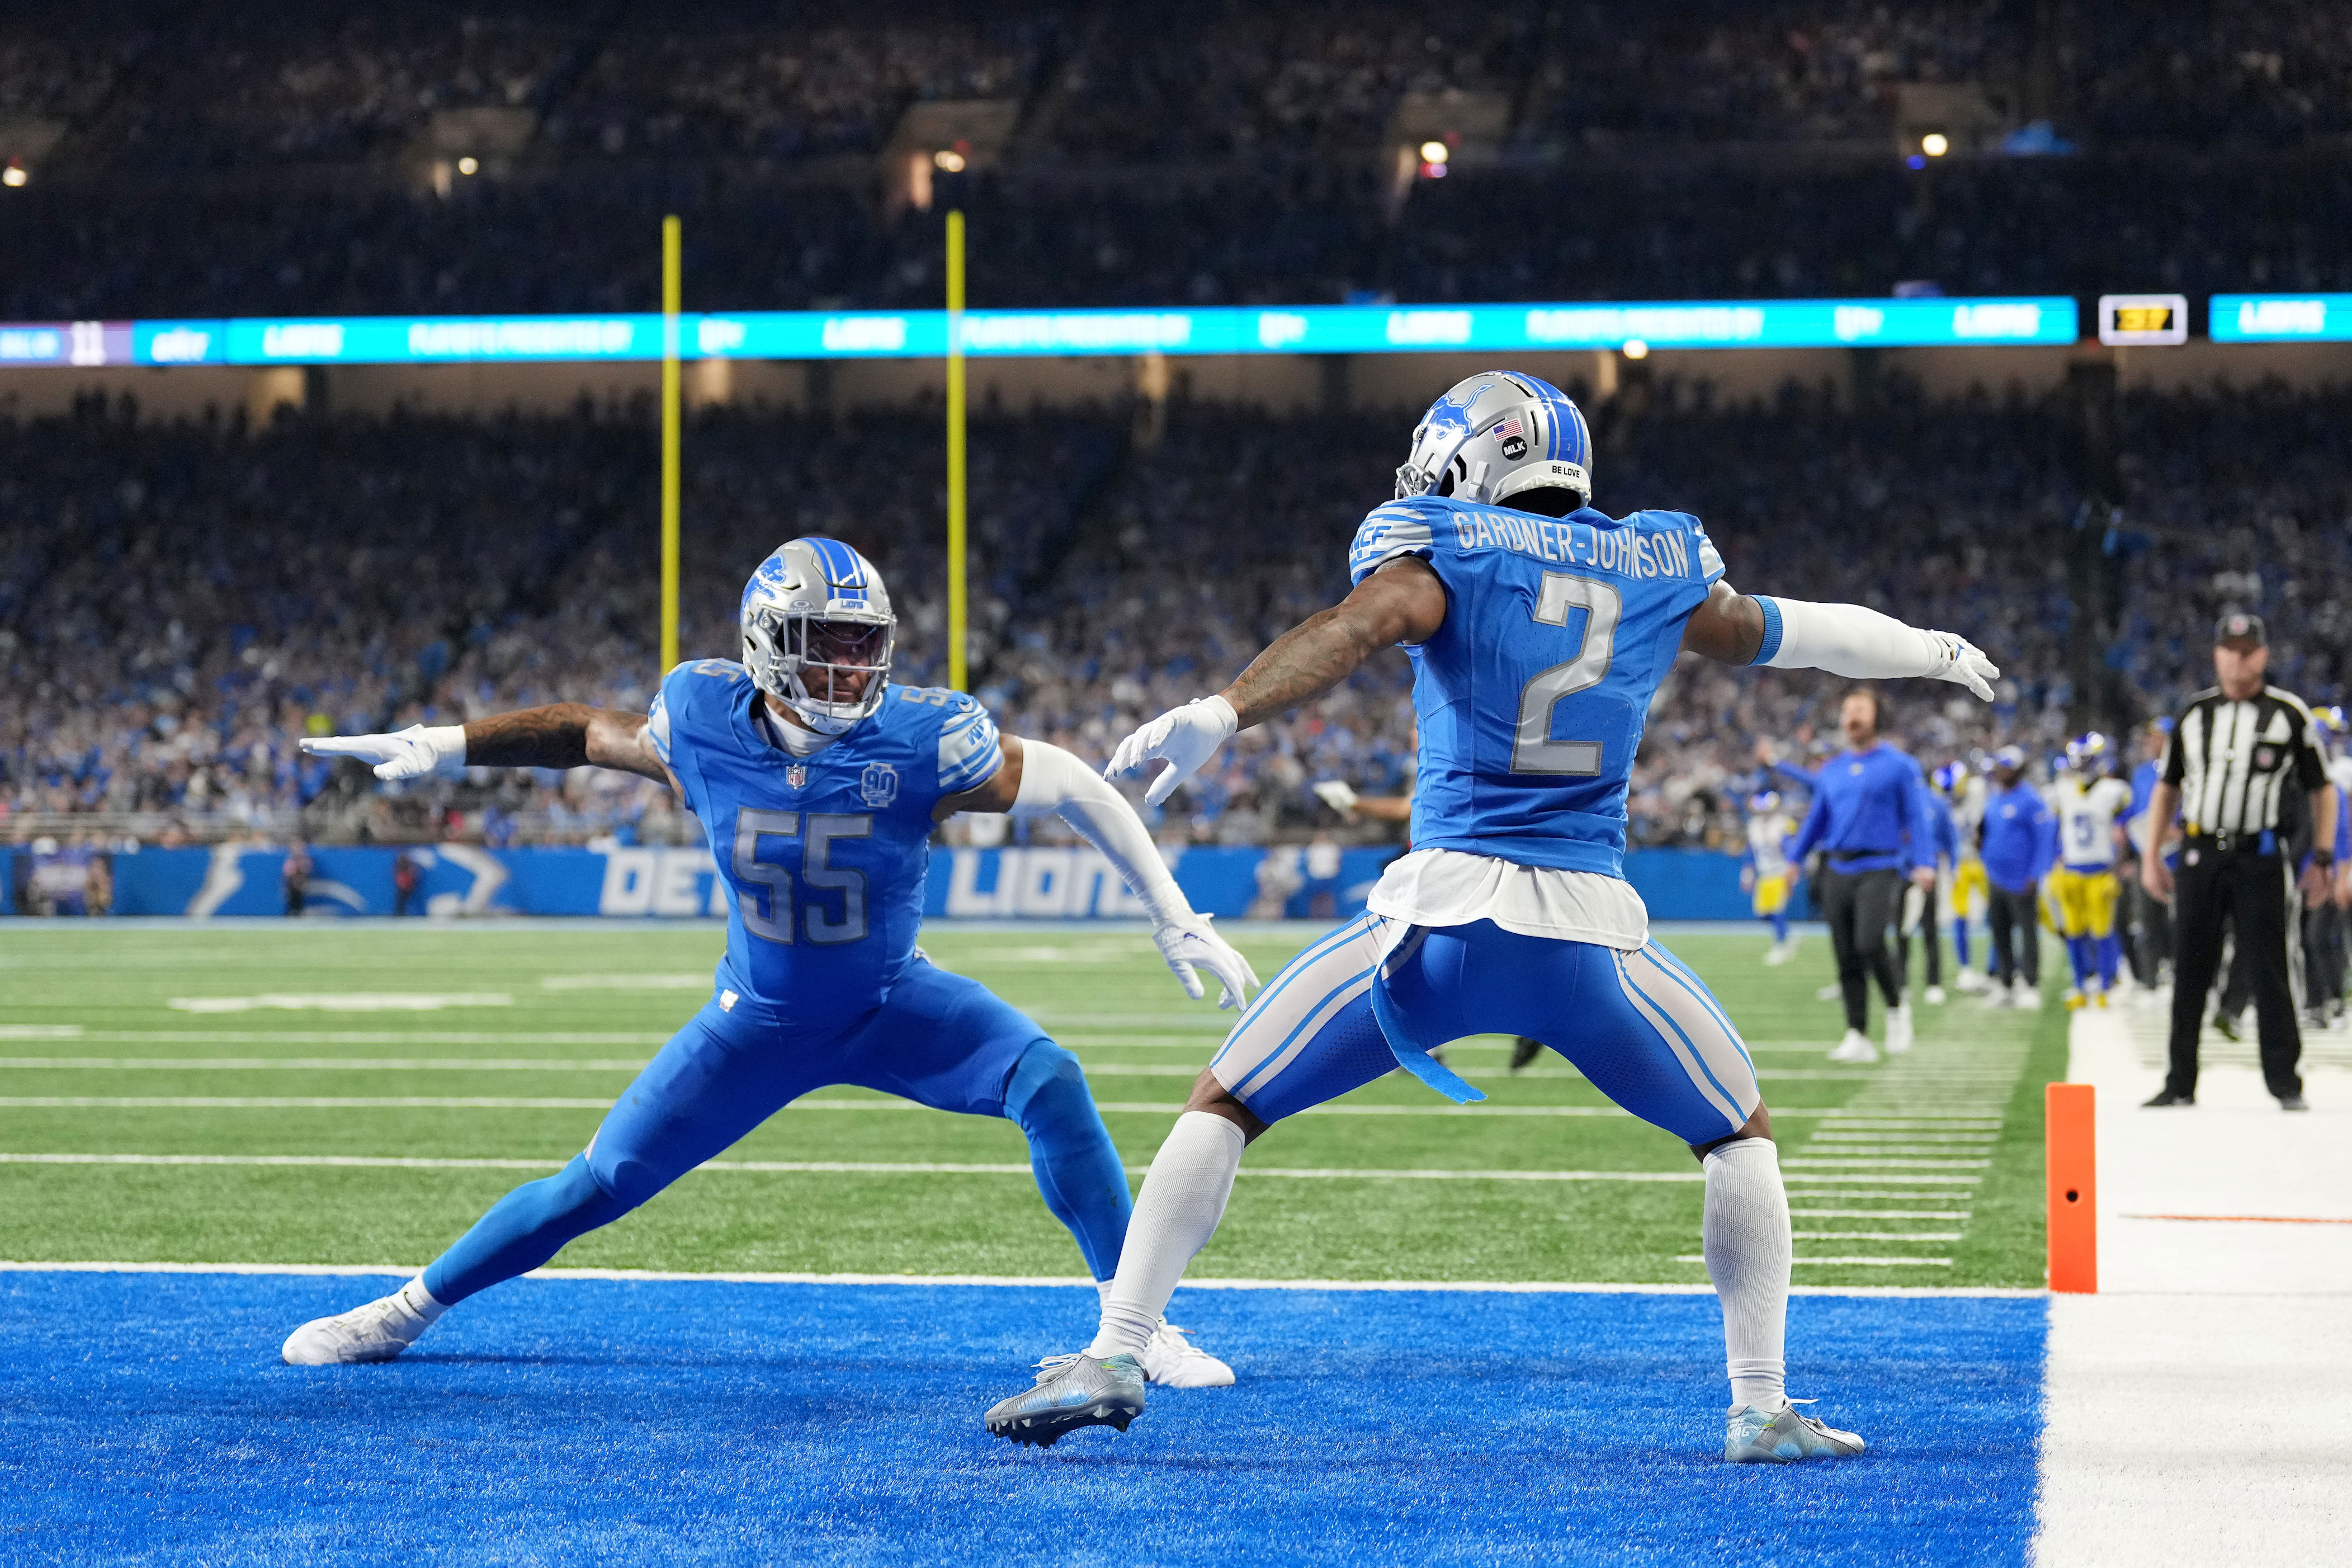 lions hold off rams for first playoff win since 1991 season